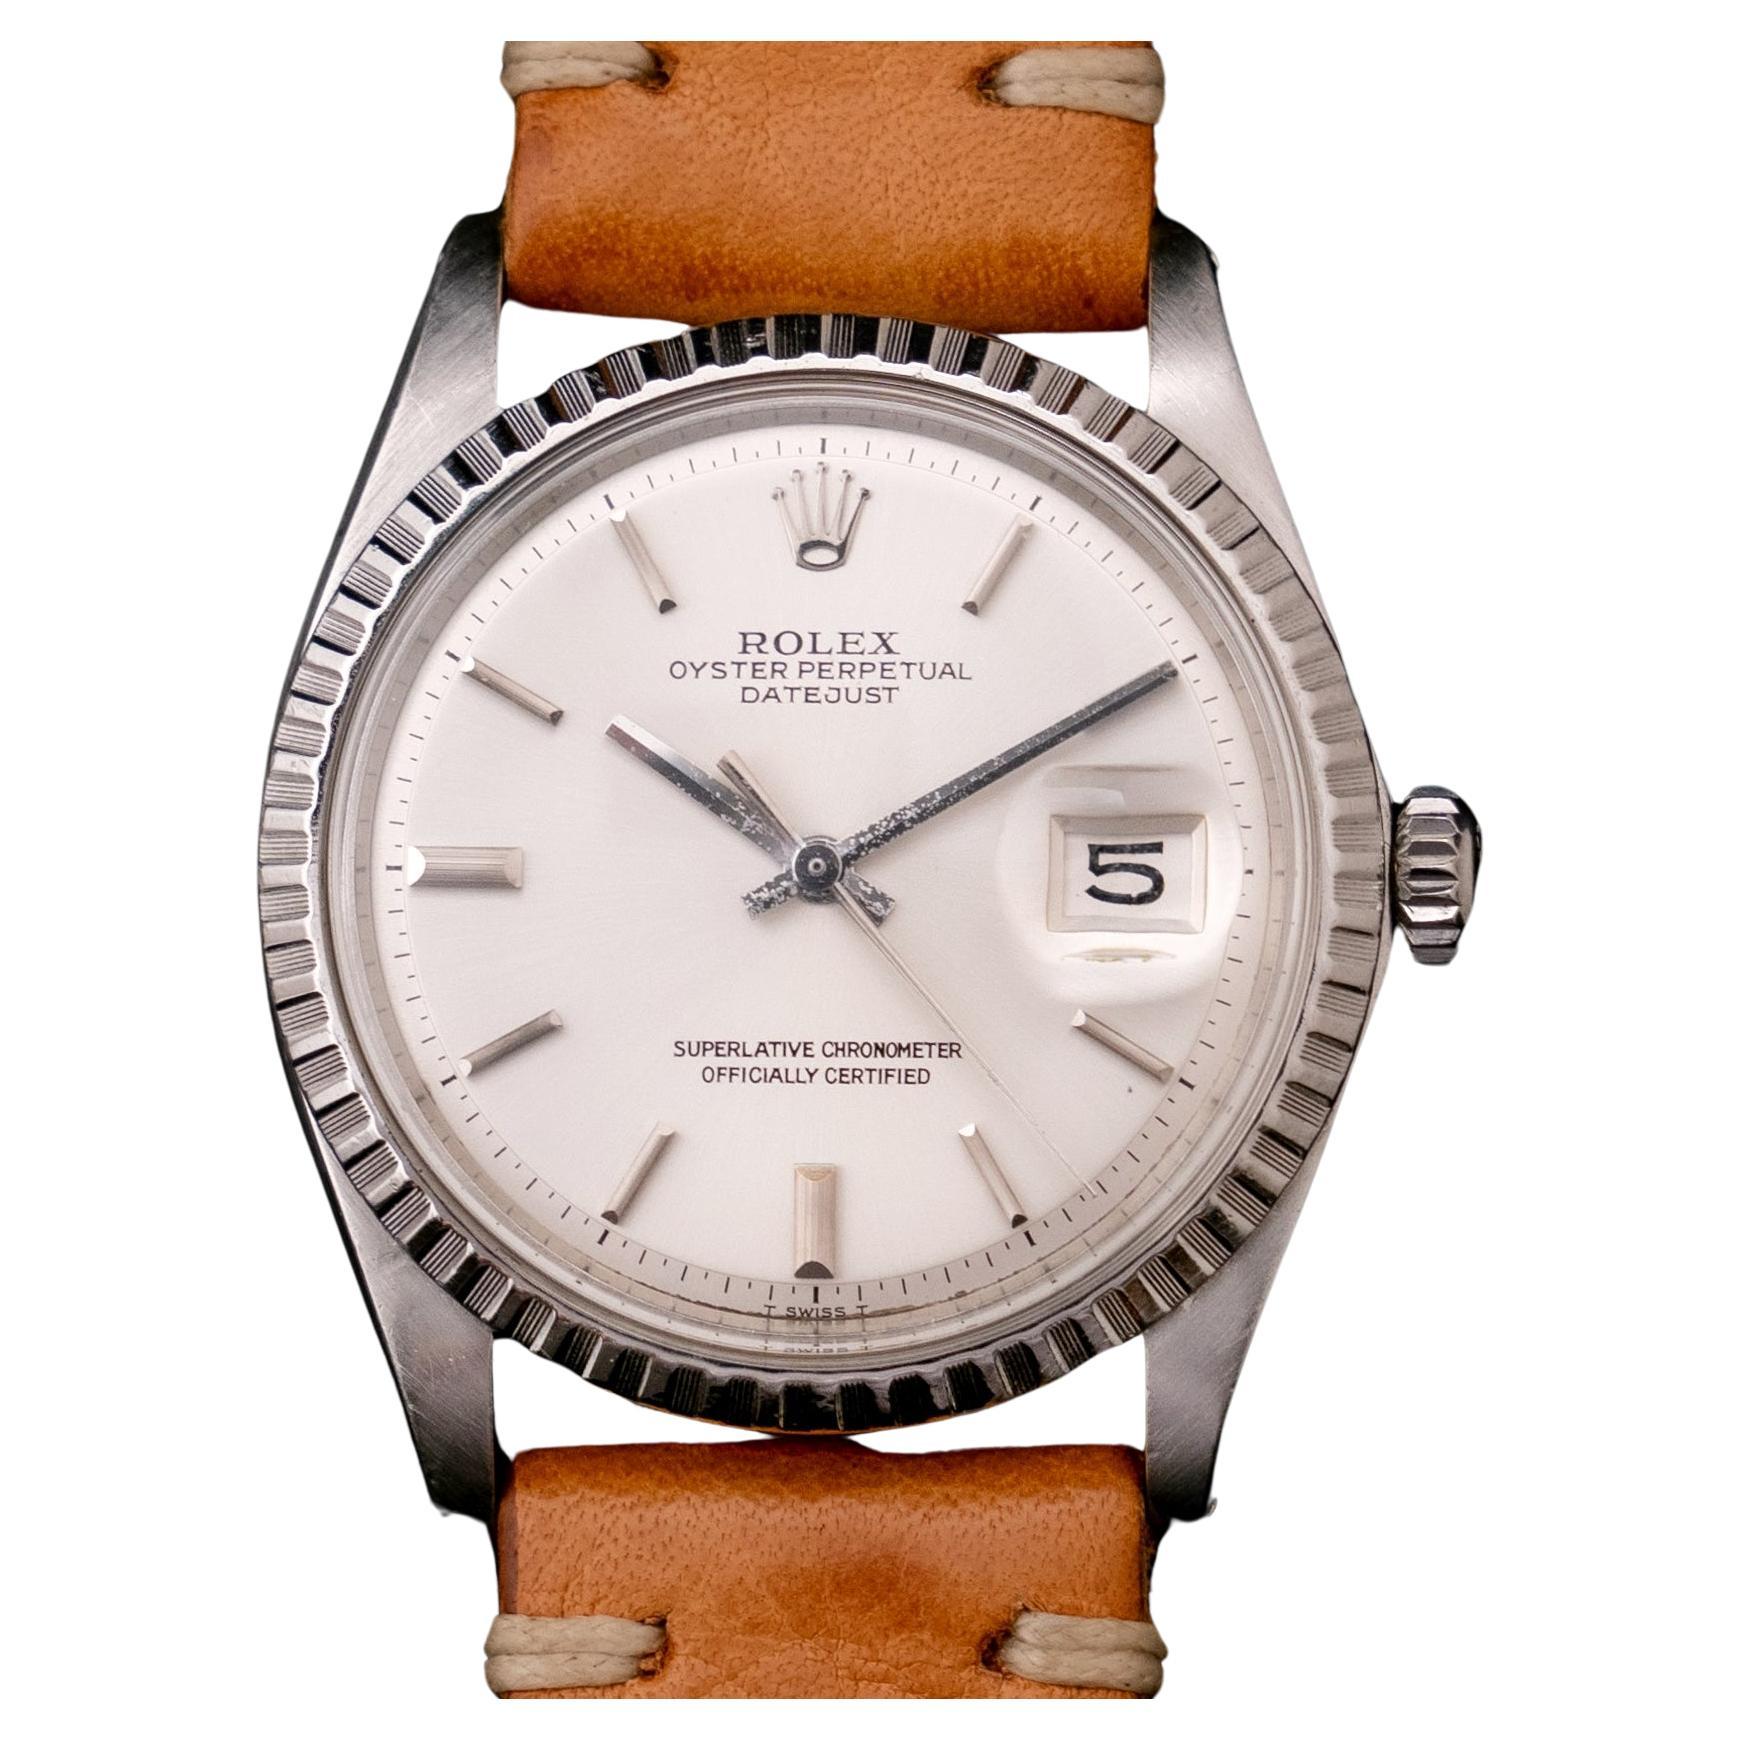 Rolex Oyster Perpetual Datejust Steel 1603 Silver Dial Automatic Watch, 1970